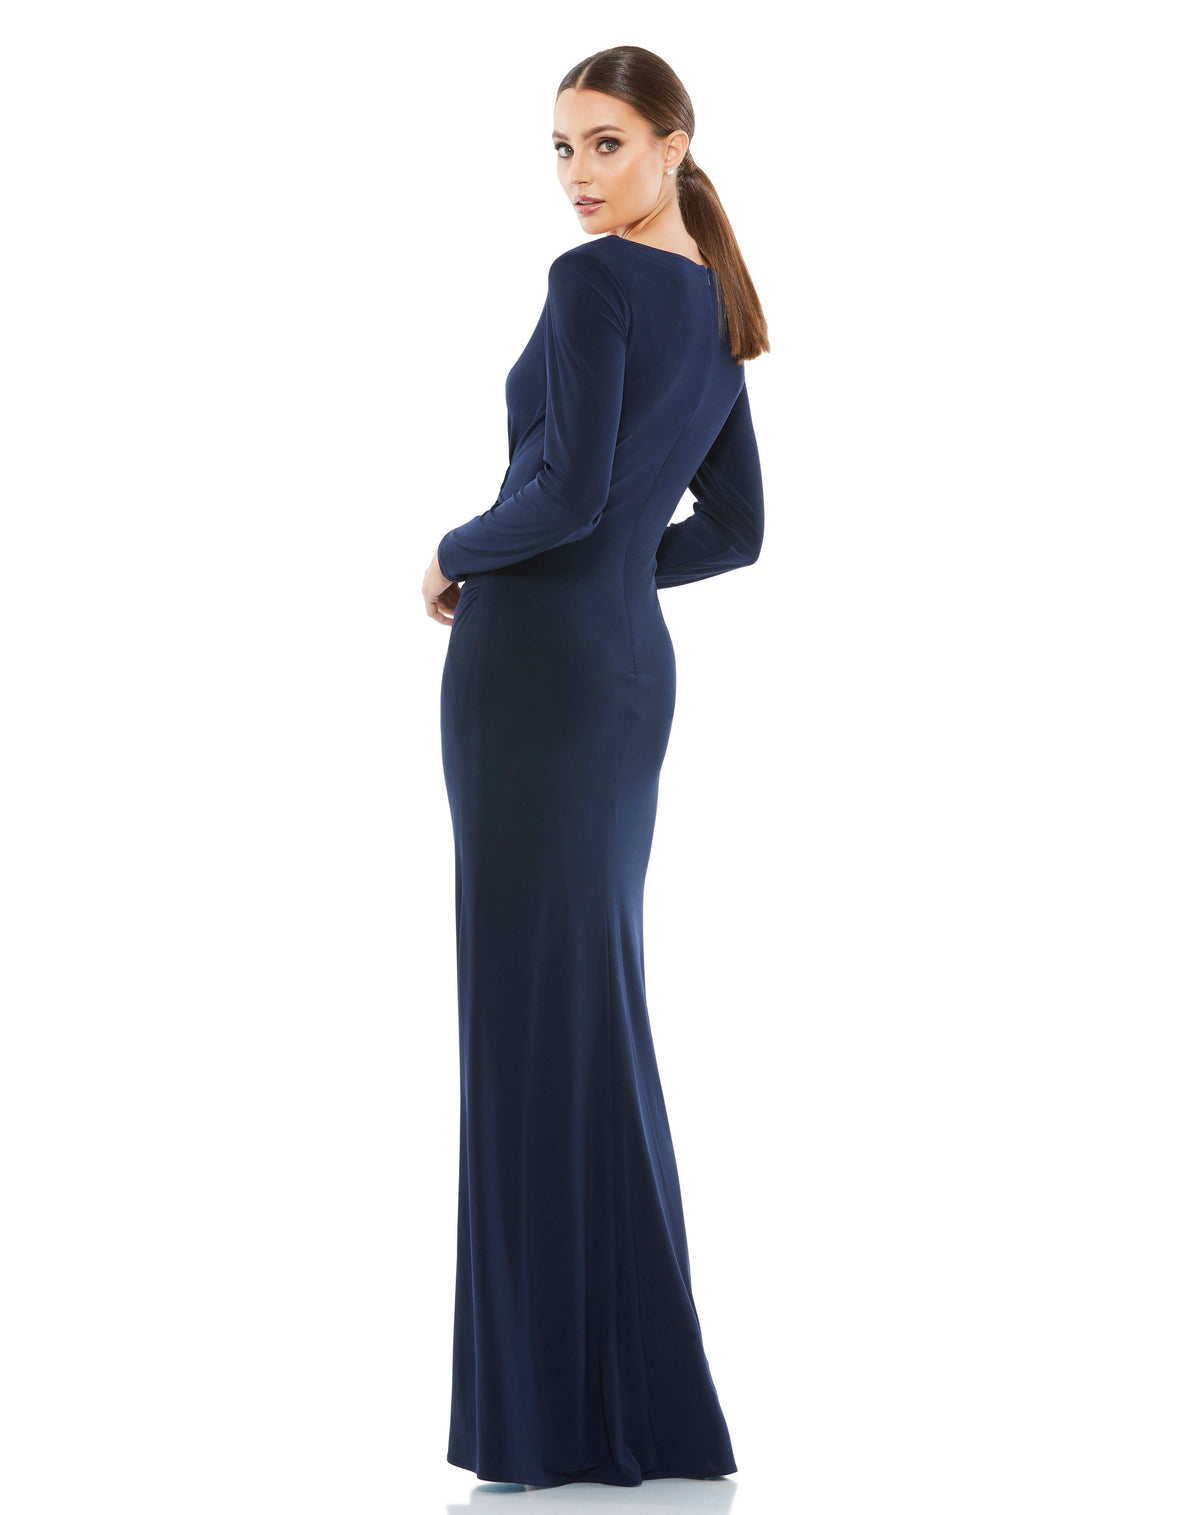 This elegant Mac Duggal midnight-blue, evening dress is a beautiful, long, simple and sleek, chic jersey gown. Cut with a curve-hugging fit, the dress is fashioned with a deep surplice neckline, long sleeves and pleating at the waist. This gown is perfect for proms, black-tie affairs, weddings and special events! side